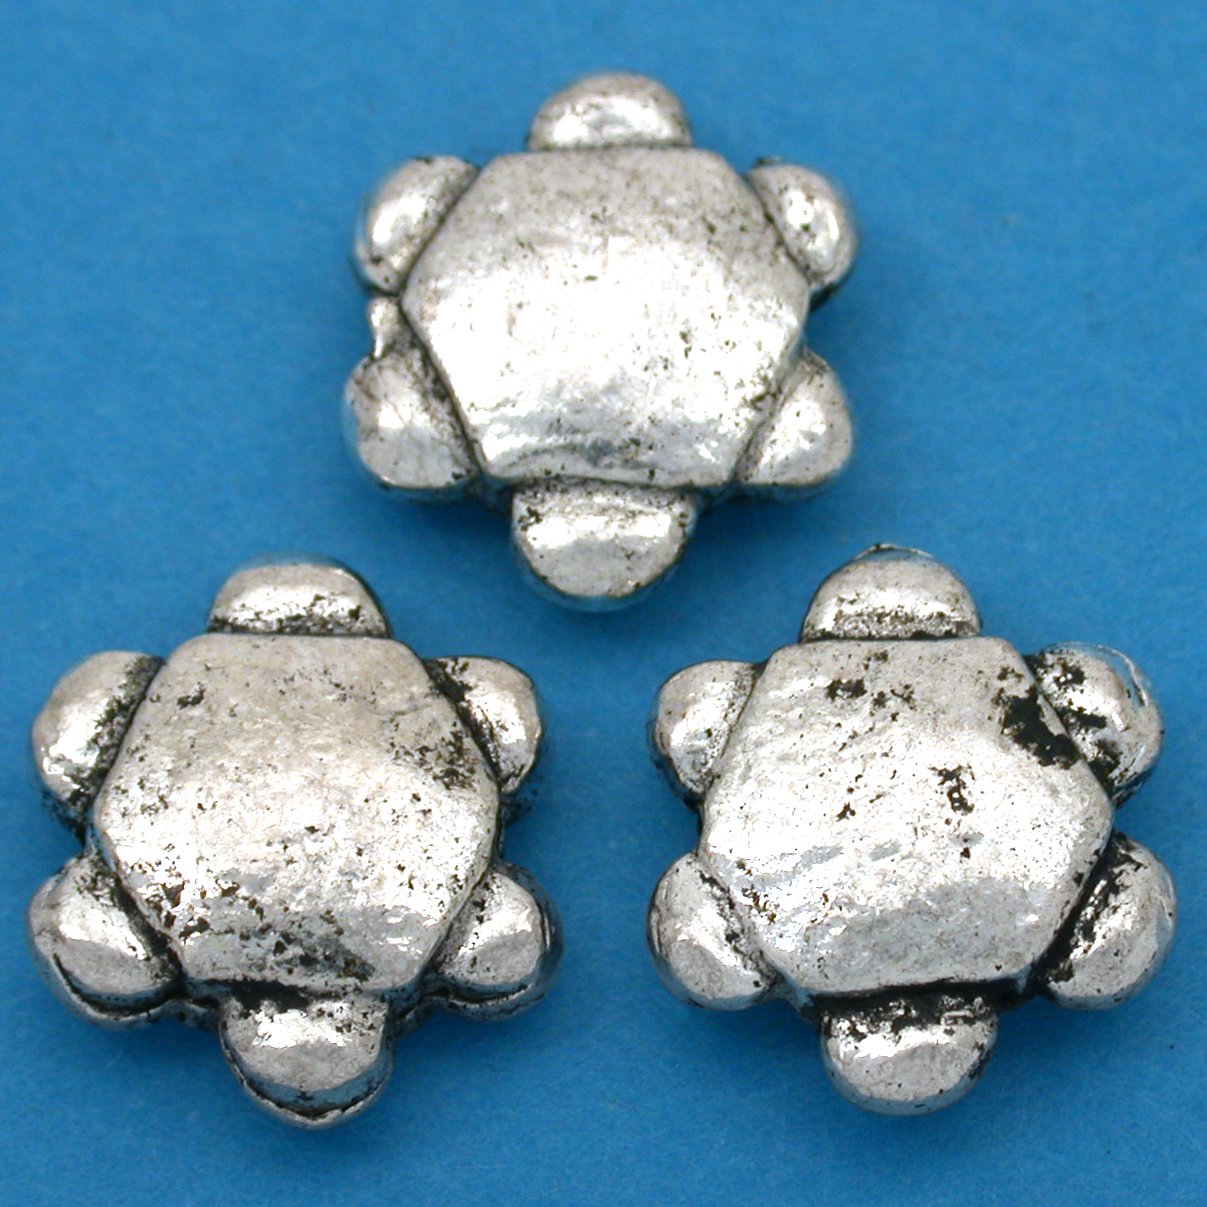 Flower Antique Silver Plated Beads 15mm 15 Grams 3Pcs Approx.